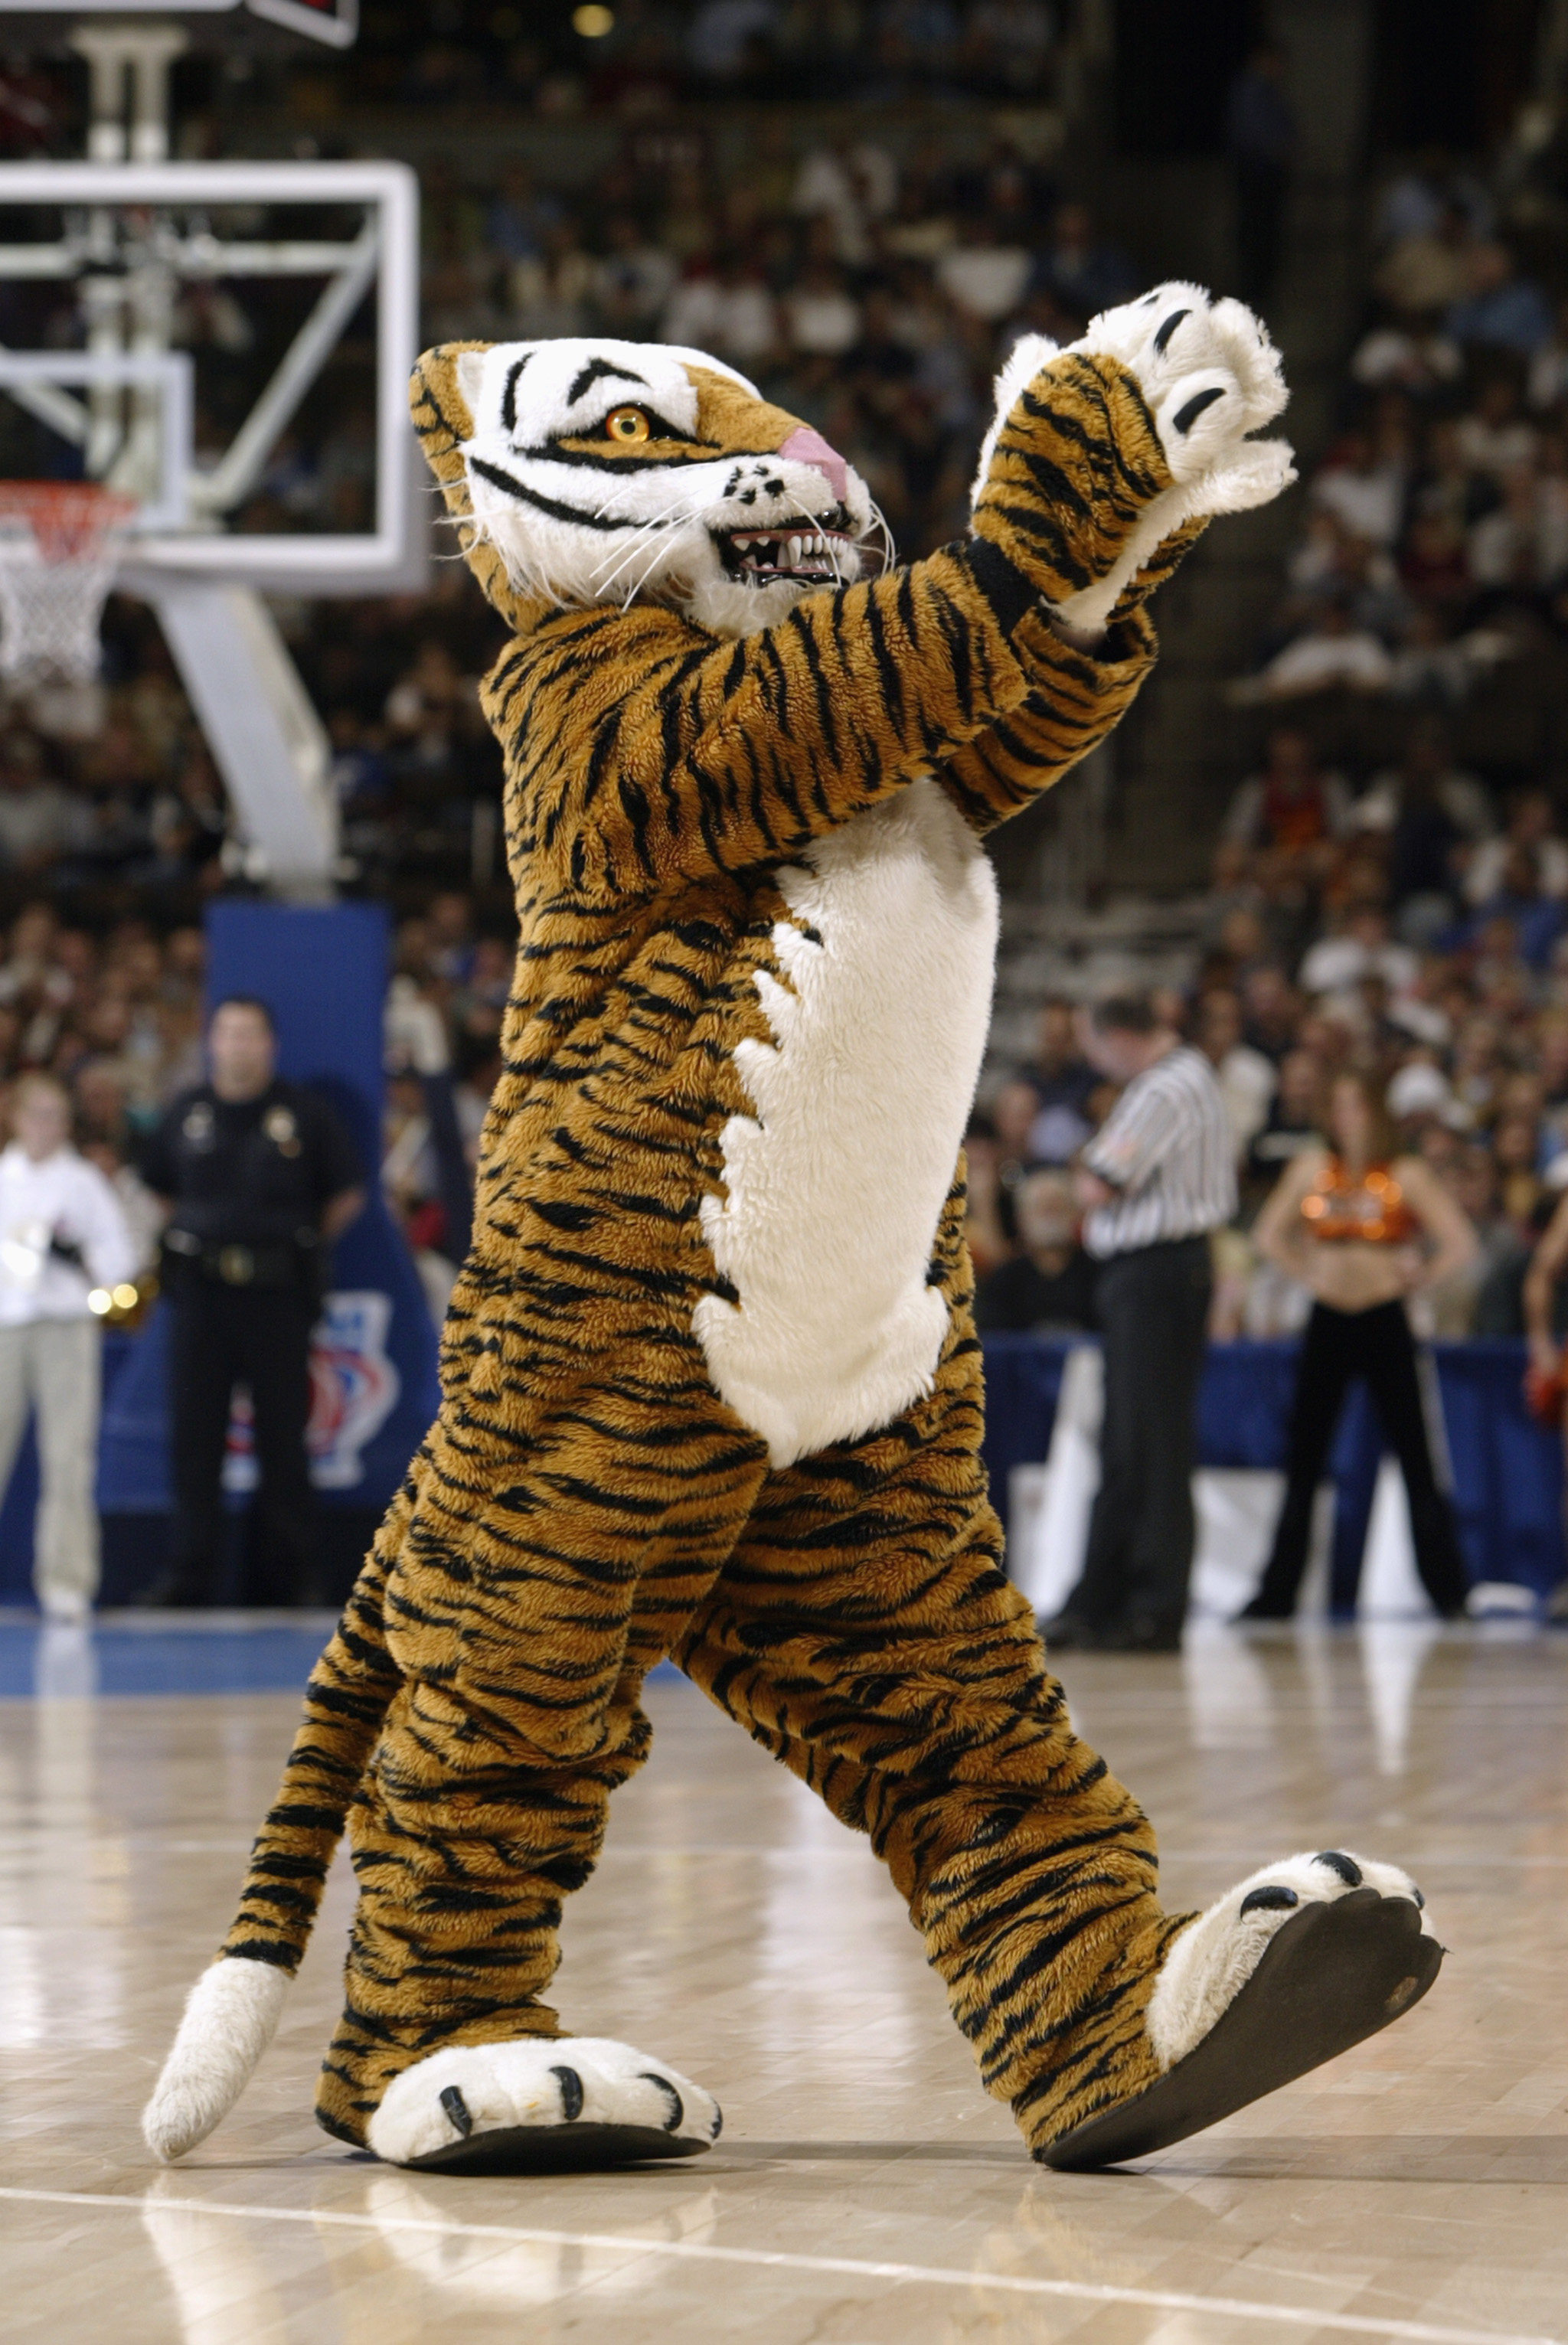 DENVER - MARCH 18:  The Princeton Tigers mascot entertains the crowd during a first round game in the NCAA Men's Basketball Tournament against the Texas Longhorns at Pepsi Center on March 18, 2004 in Denver, Colorado. Texas defeated Princeton 66-49.  (Pho